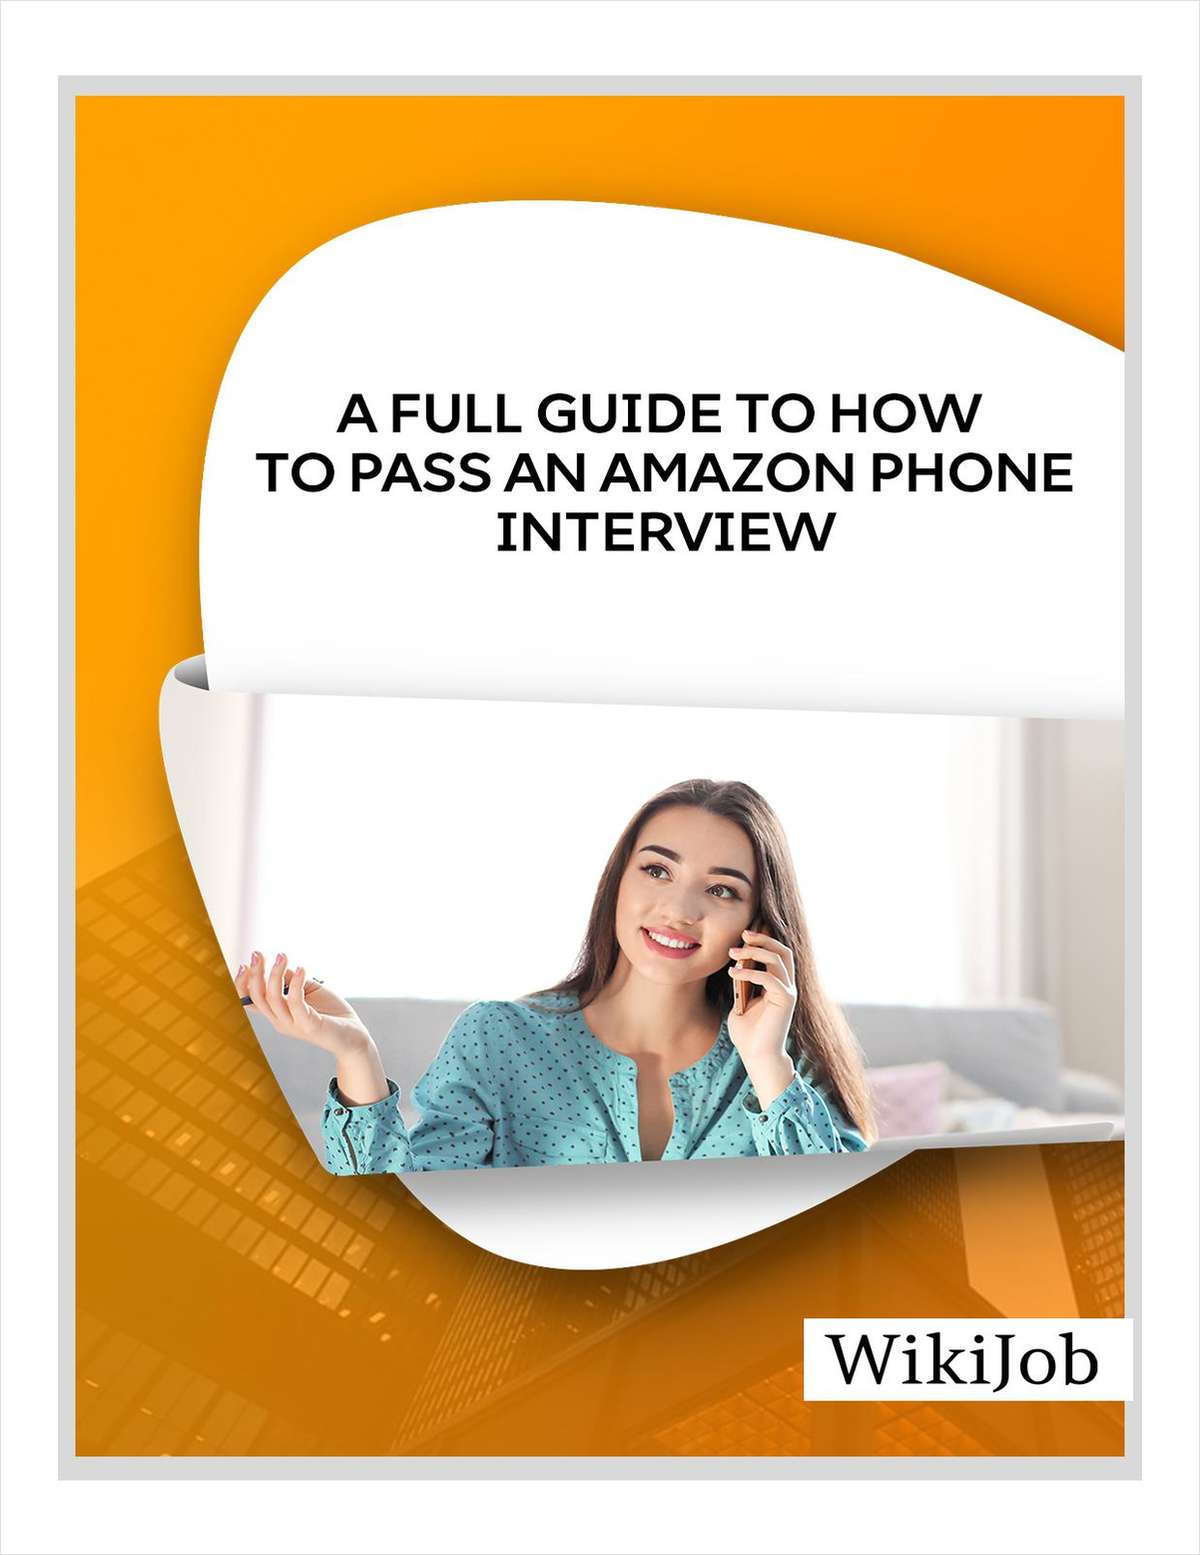 A Full Guide to How to Pass an Amazon Phone Interview